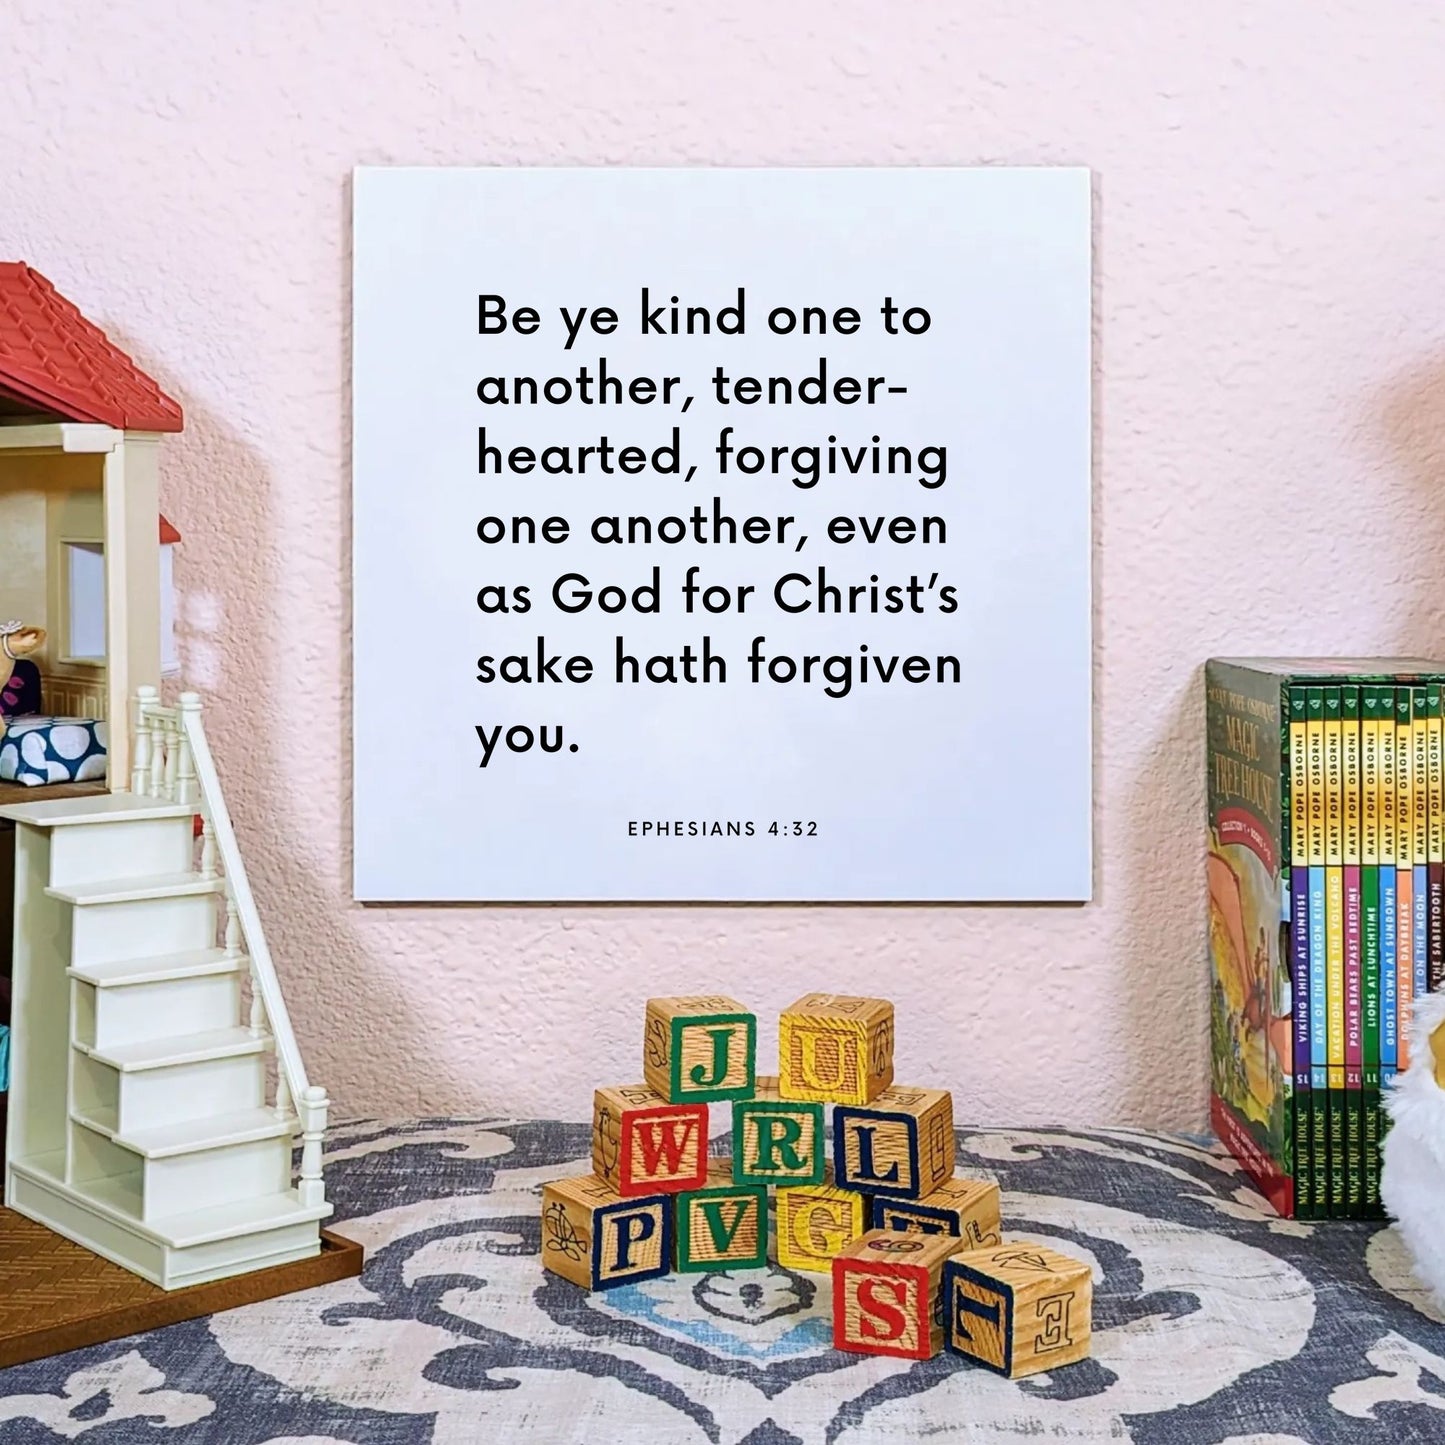 Playroom mouting of the scripture tile for Ephesians 4:32 - "Be ye kind one to another, tenderhearted"